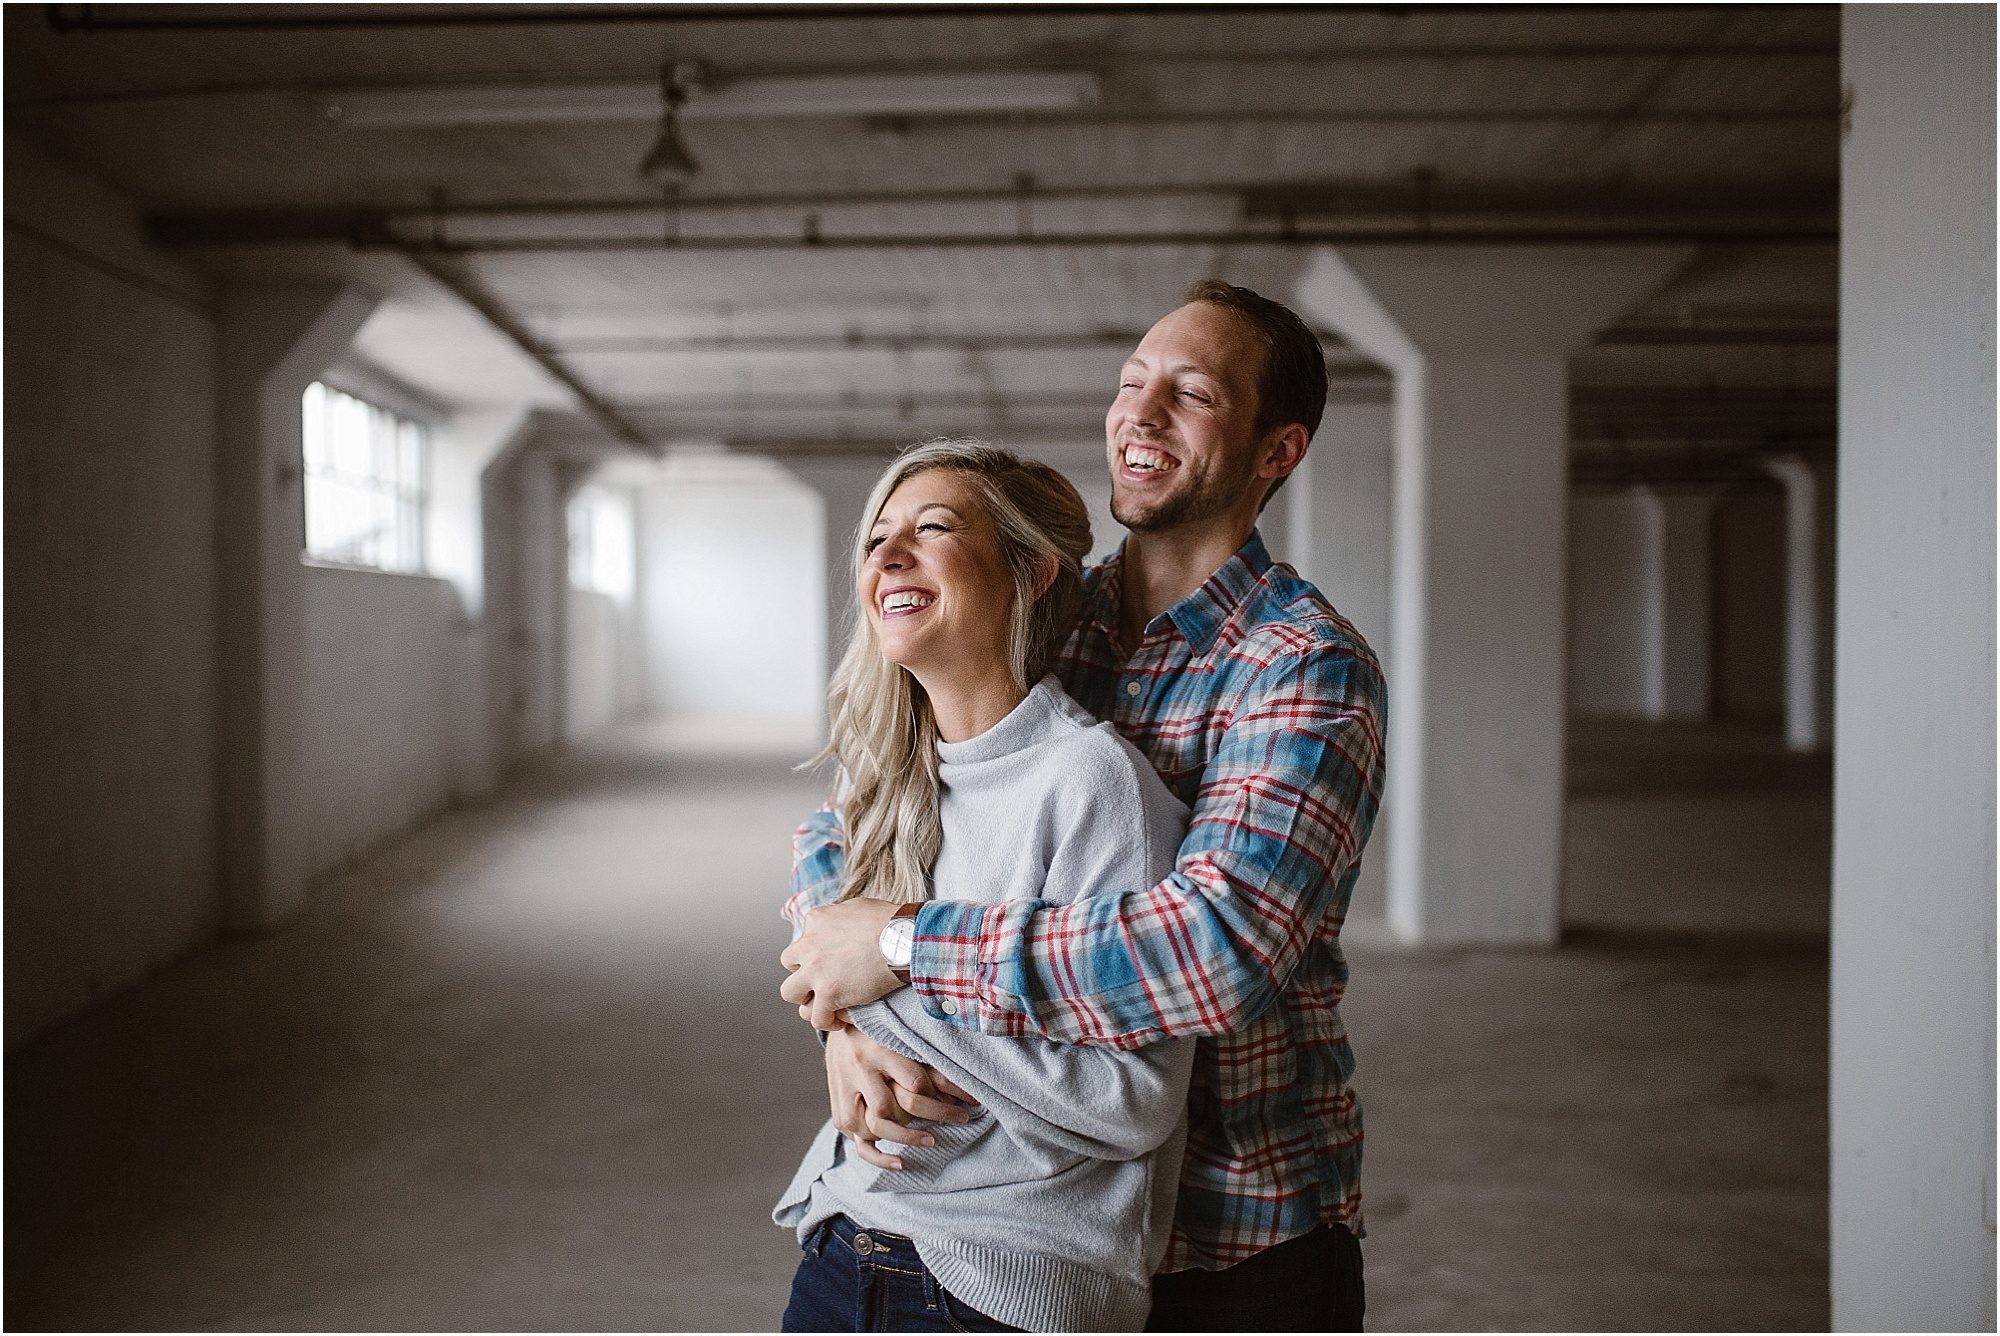 Industrial Engagement Photos Knoxville | Photographed by Erin Morrison Photography | https://erinmorrisonphotography.com/rainy-day-industrial-engagement-photos-knoxville/